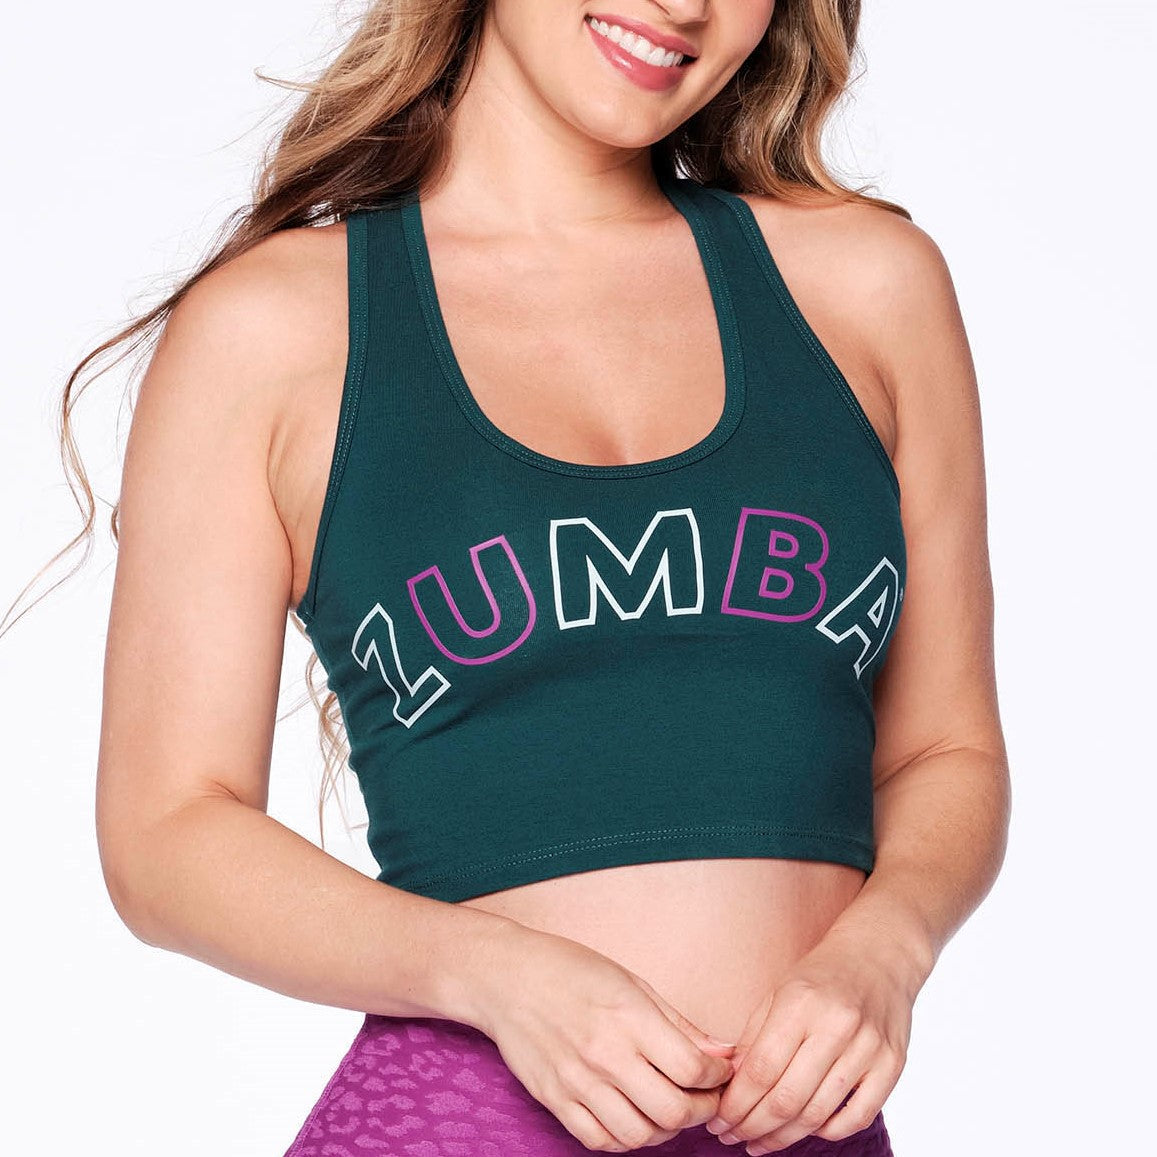 Zumba Stand Together Crop Racerback